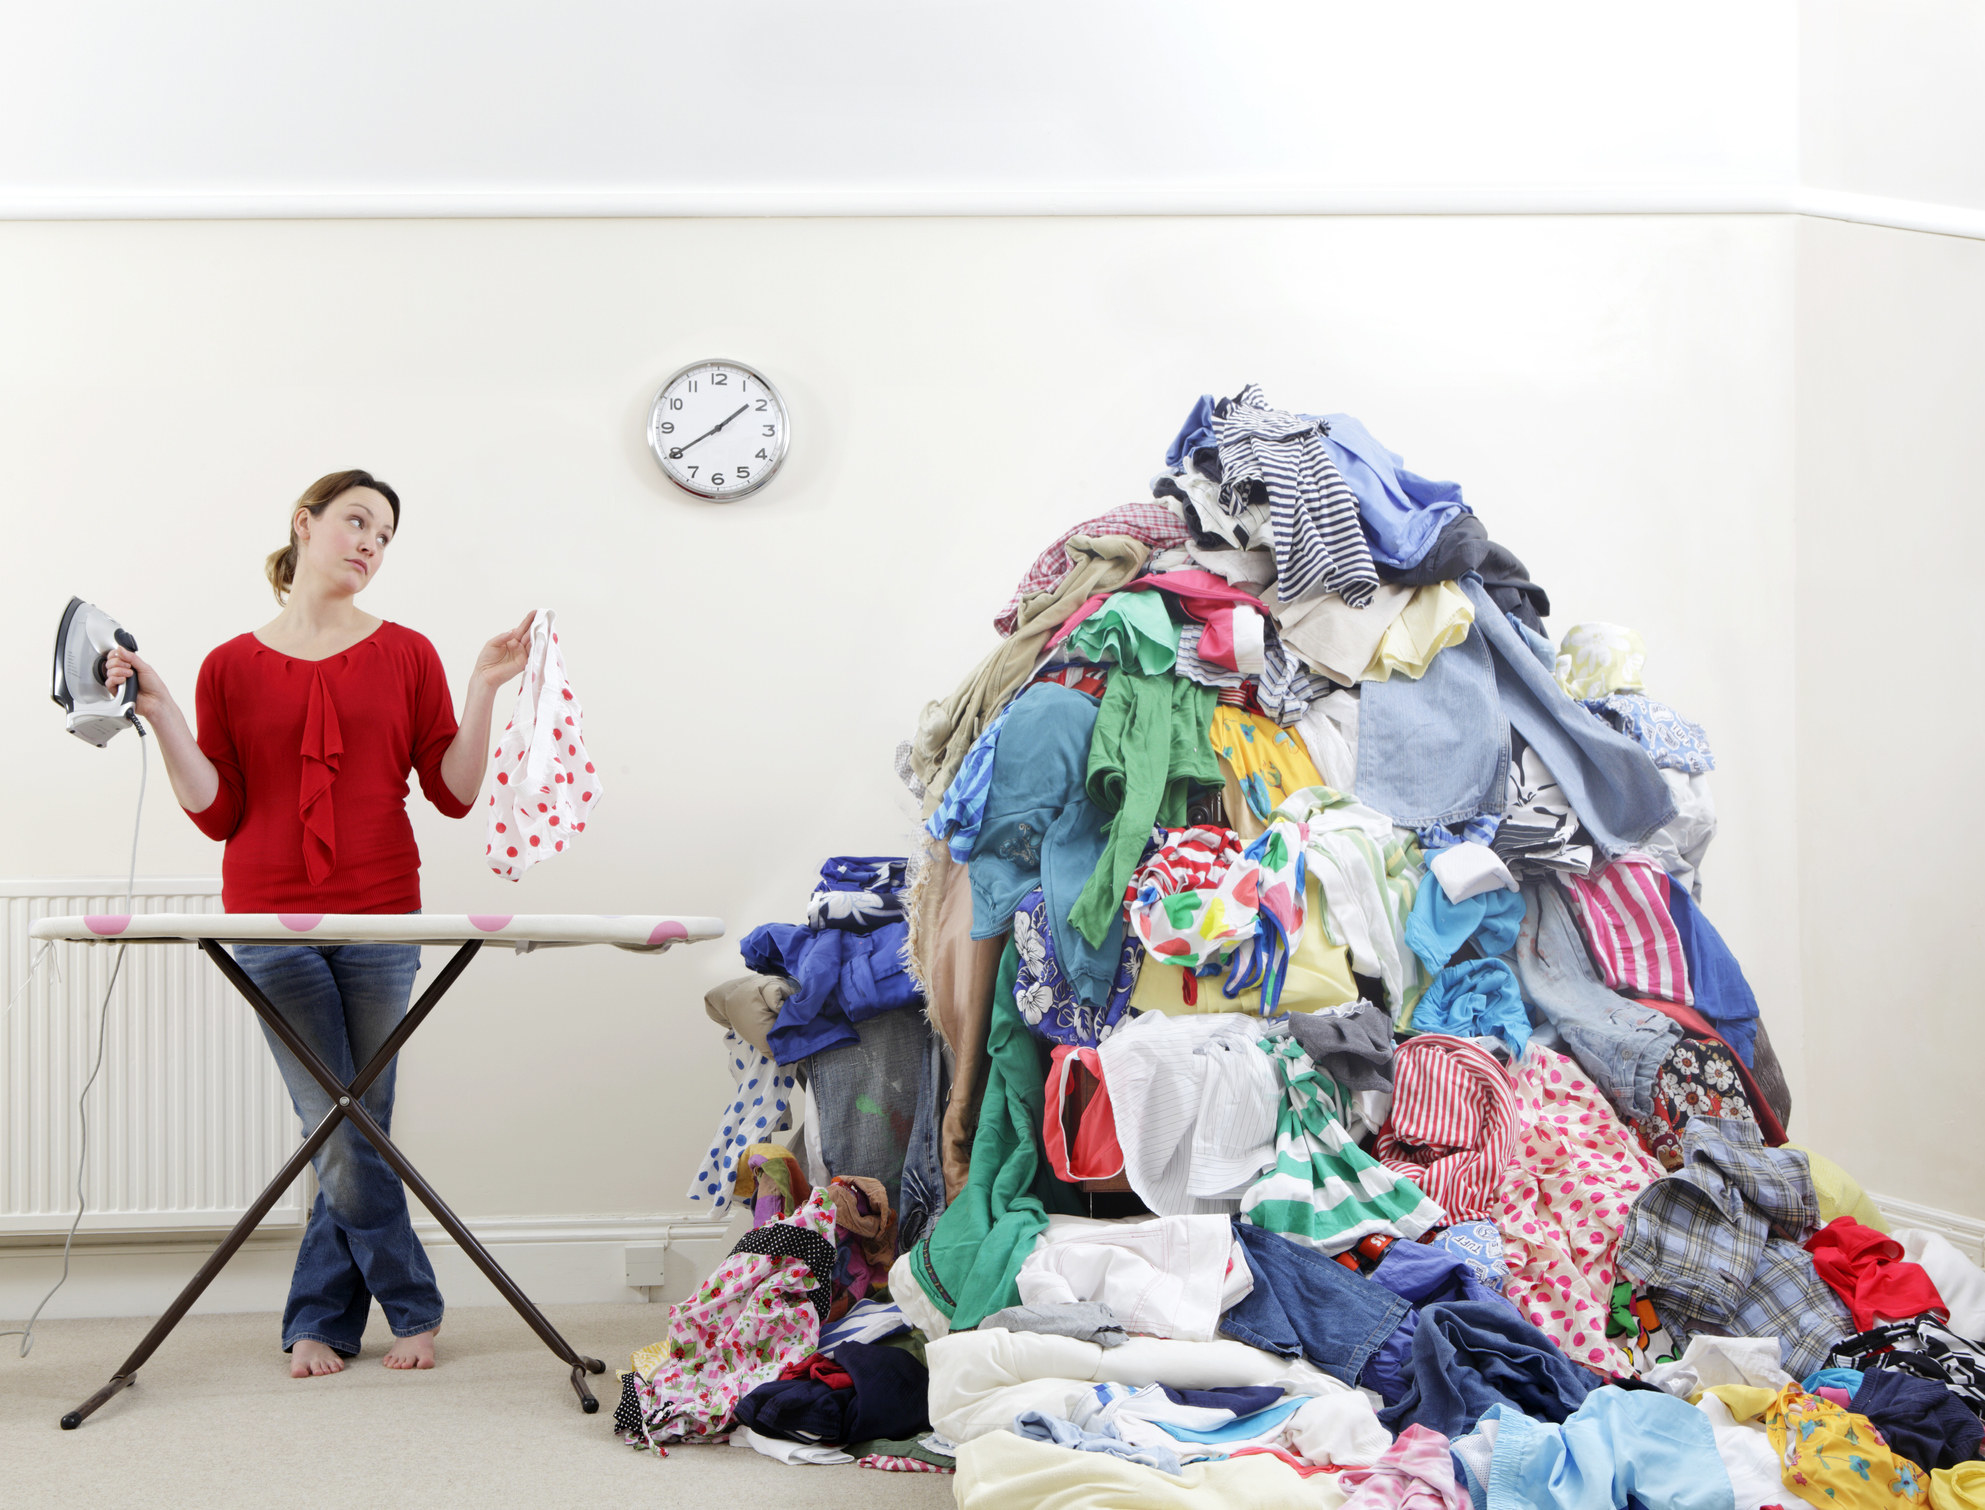 A woman standing at an ironic board and holding up an iron and a piece of clothing while looking at a mountain of clothing next to her